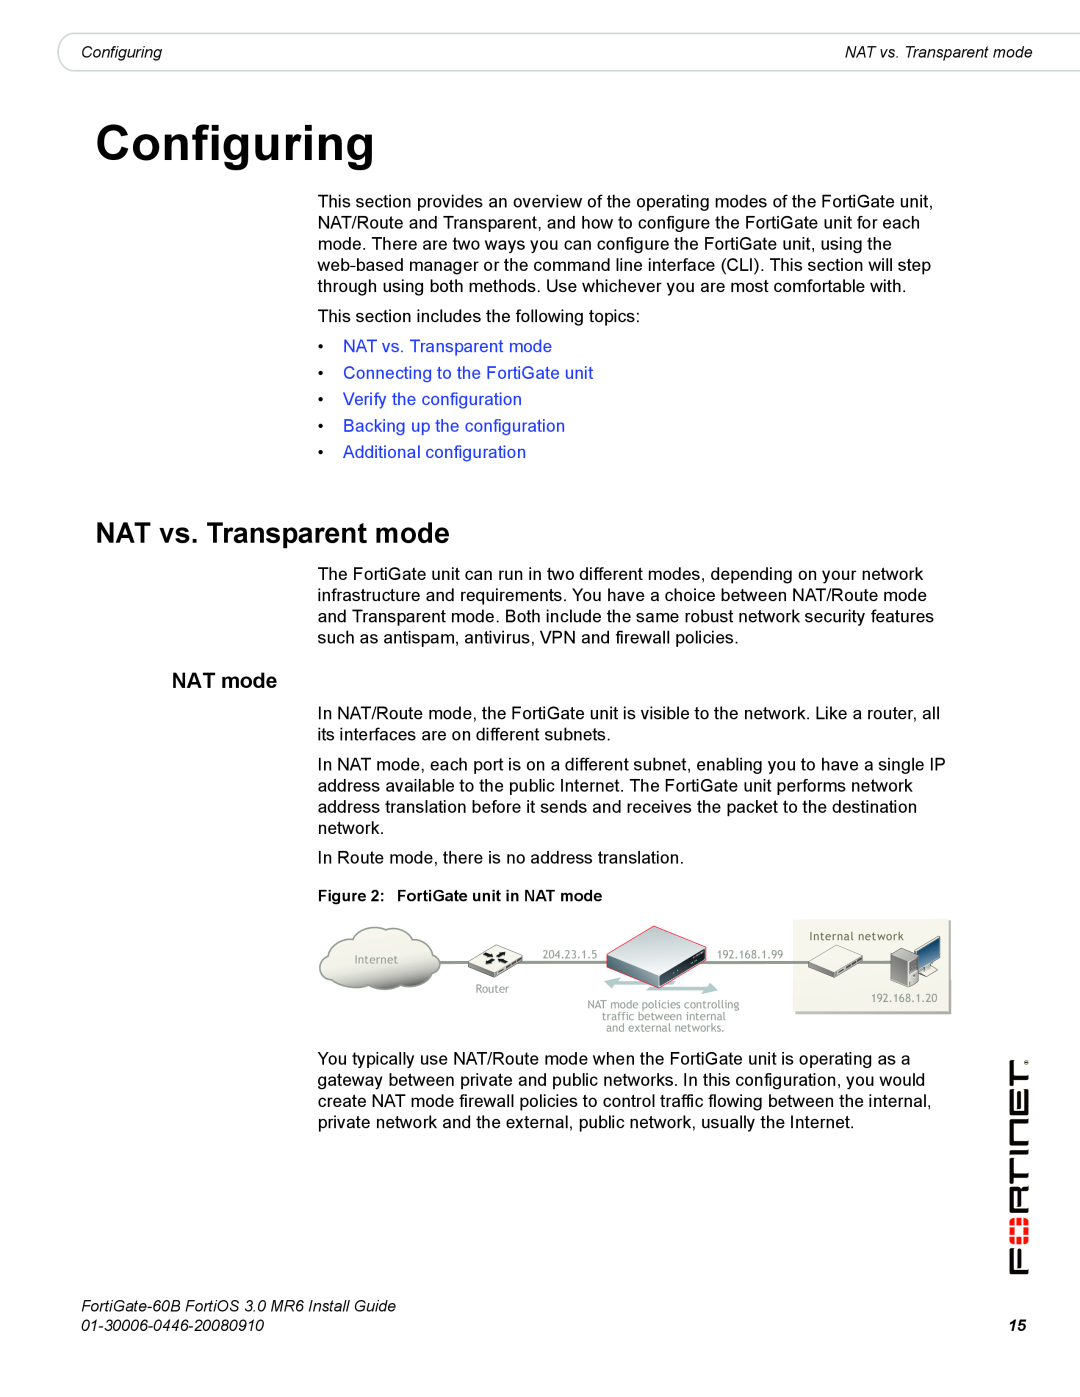 Fortinet 60B manual Configuring, NAT mode, NAT vs. Transparent mode Connecting to the FortiGate unit 